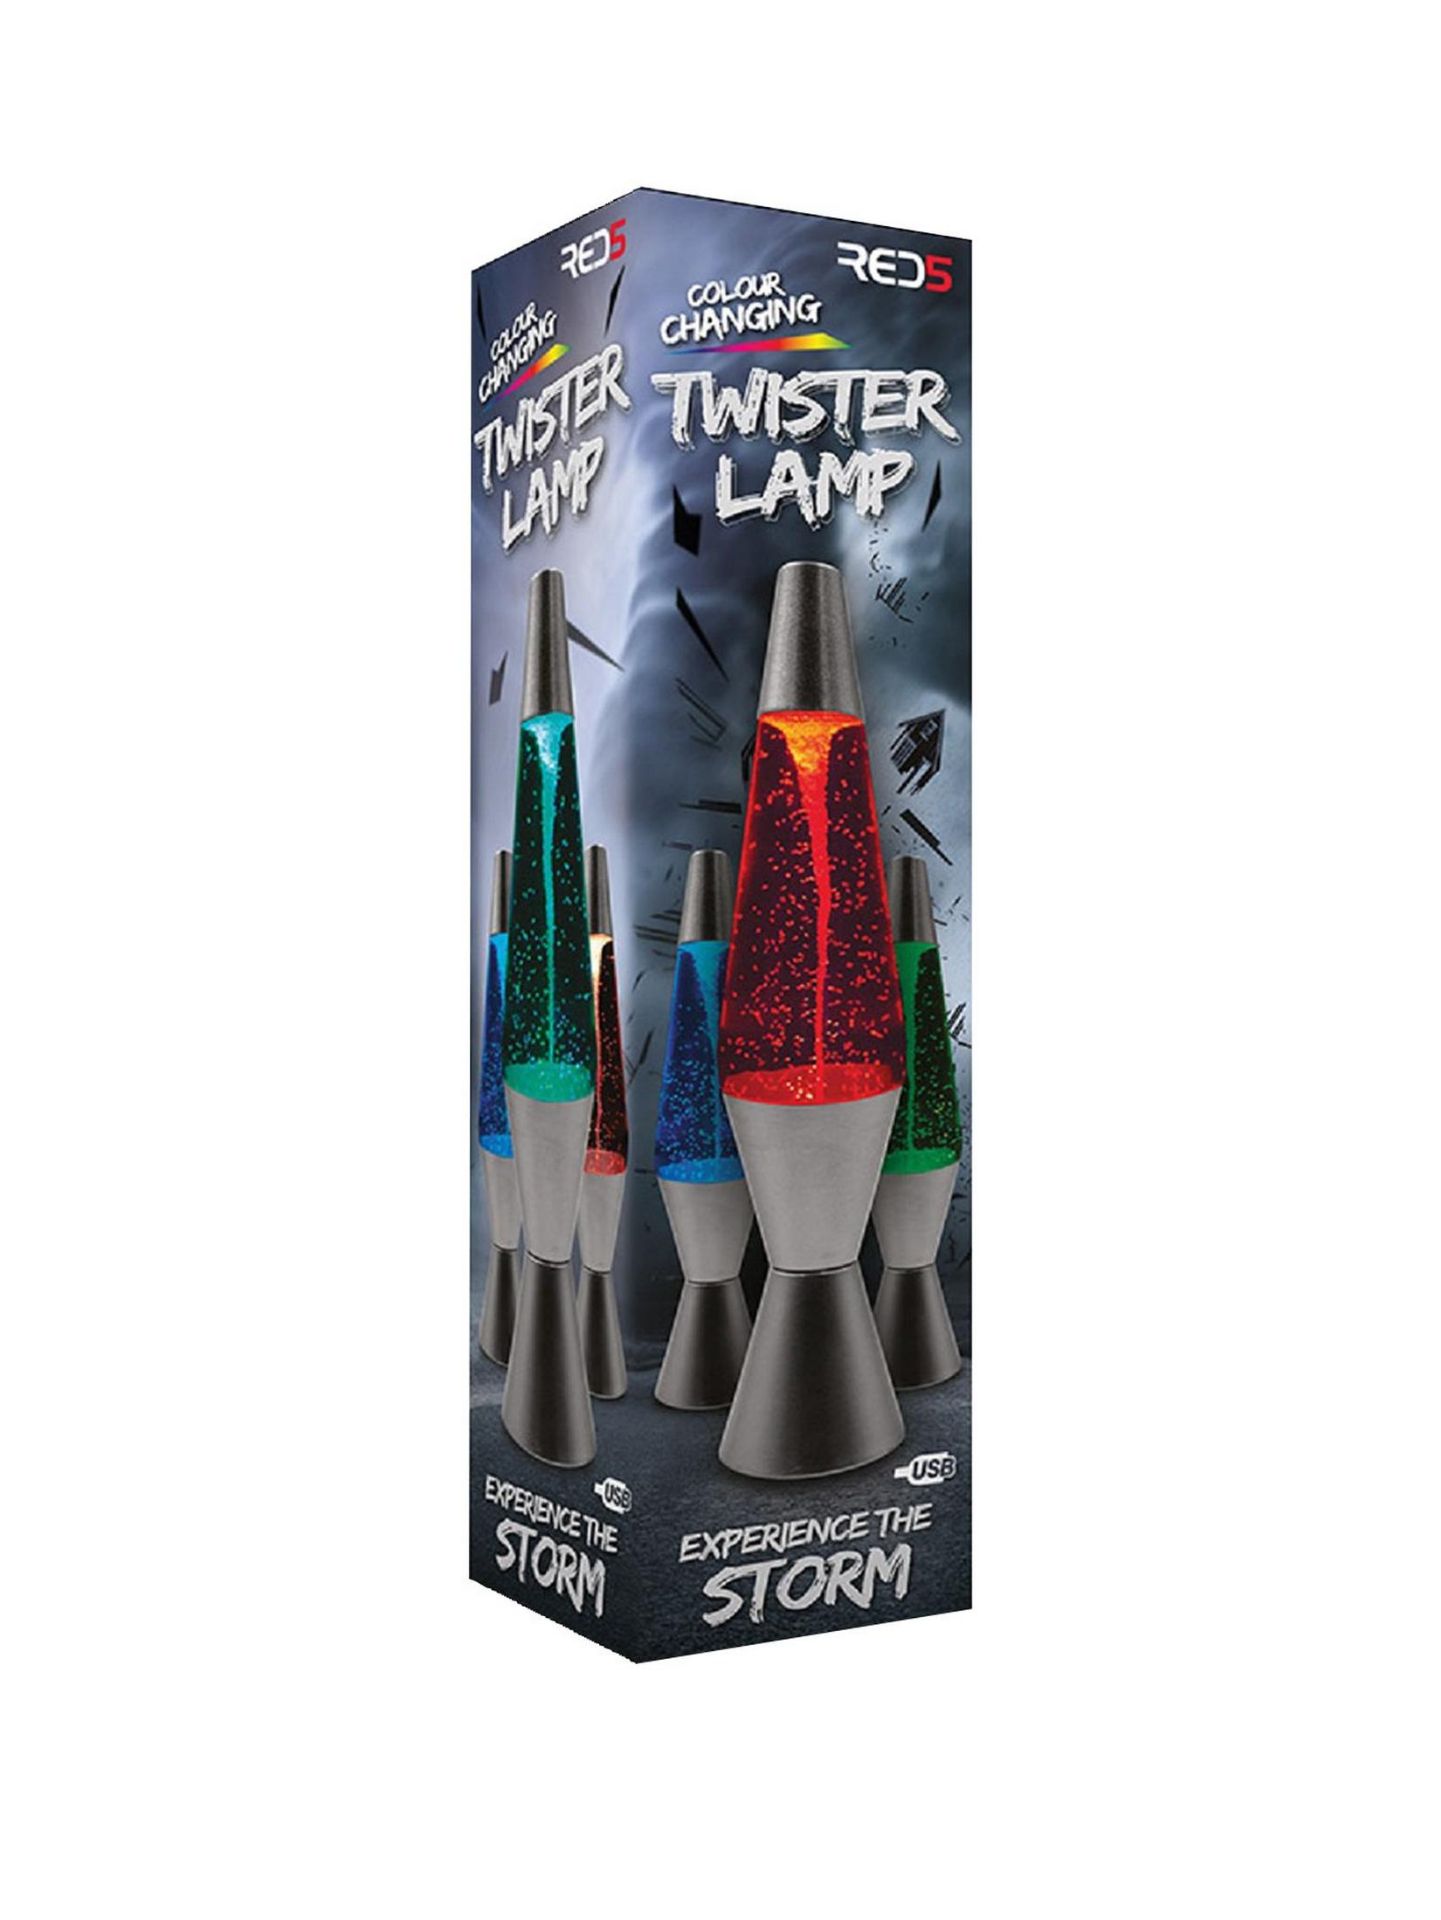 Title: (87/P) 10x Red5 Colour Changing Twister Lamp RRP £20 Each (All Units Have Return To